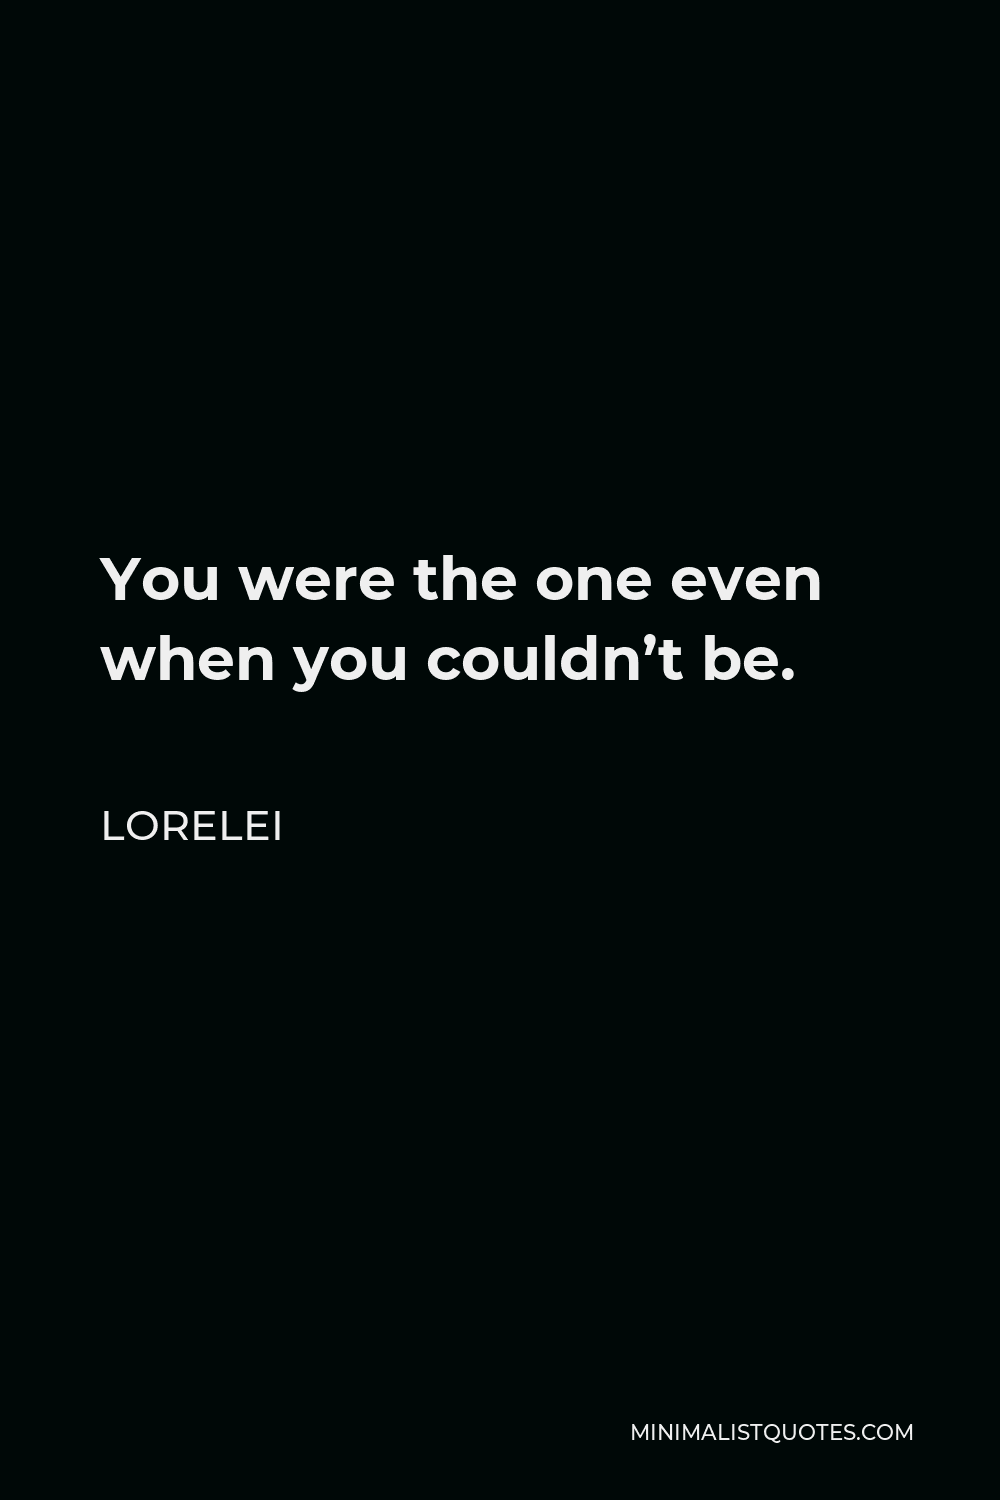 Lorelei Quote - You were the one even when you couldn’t be.